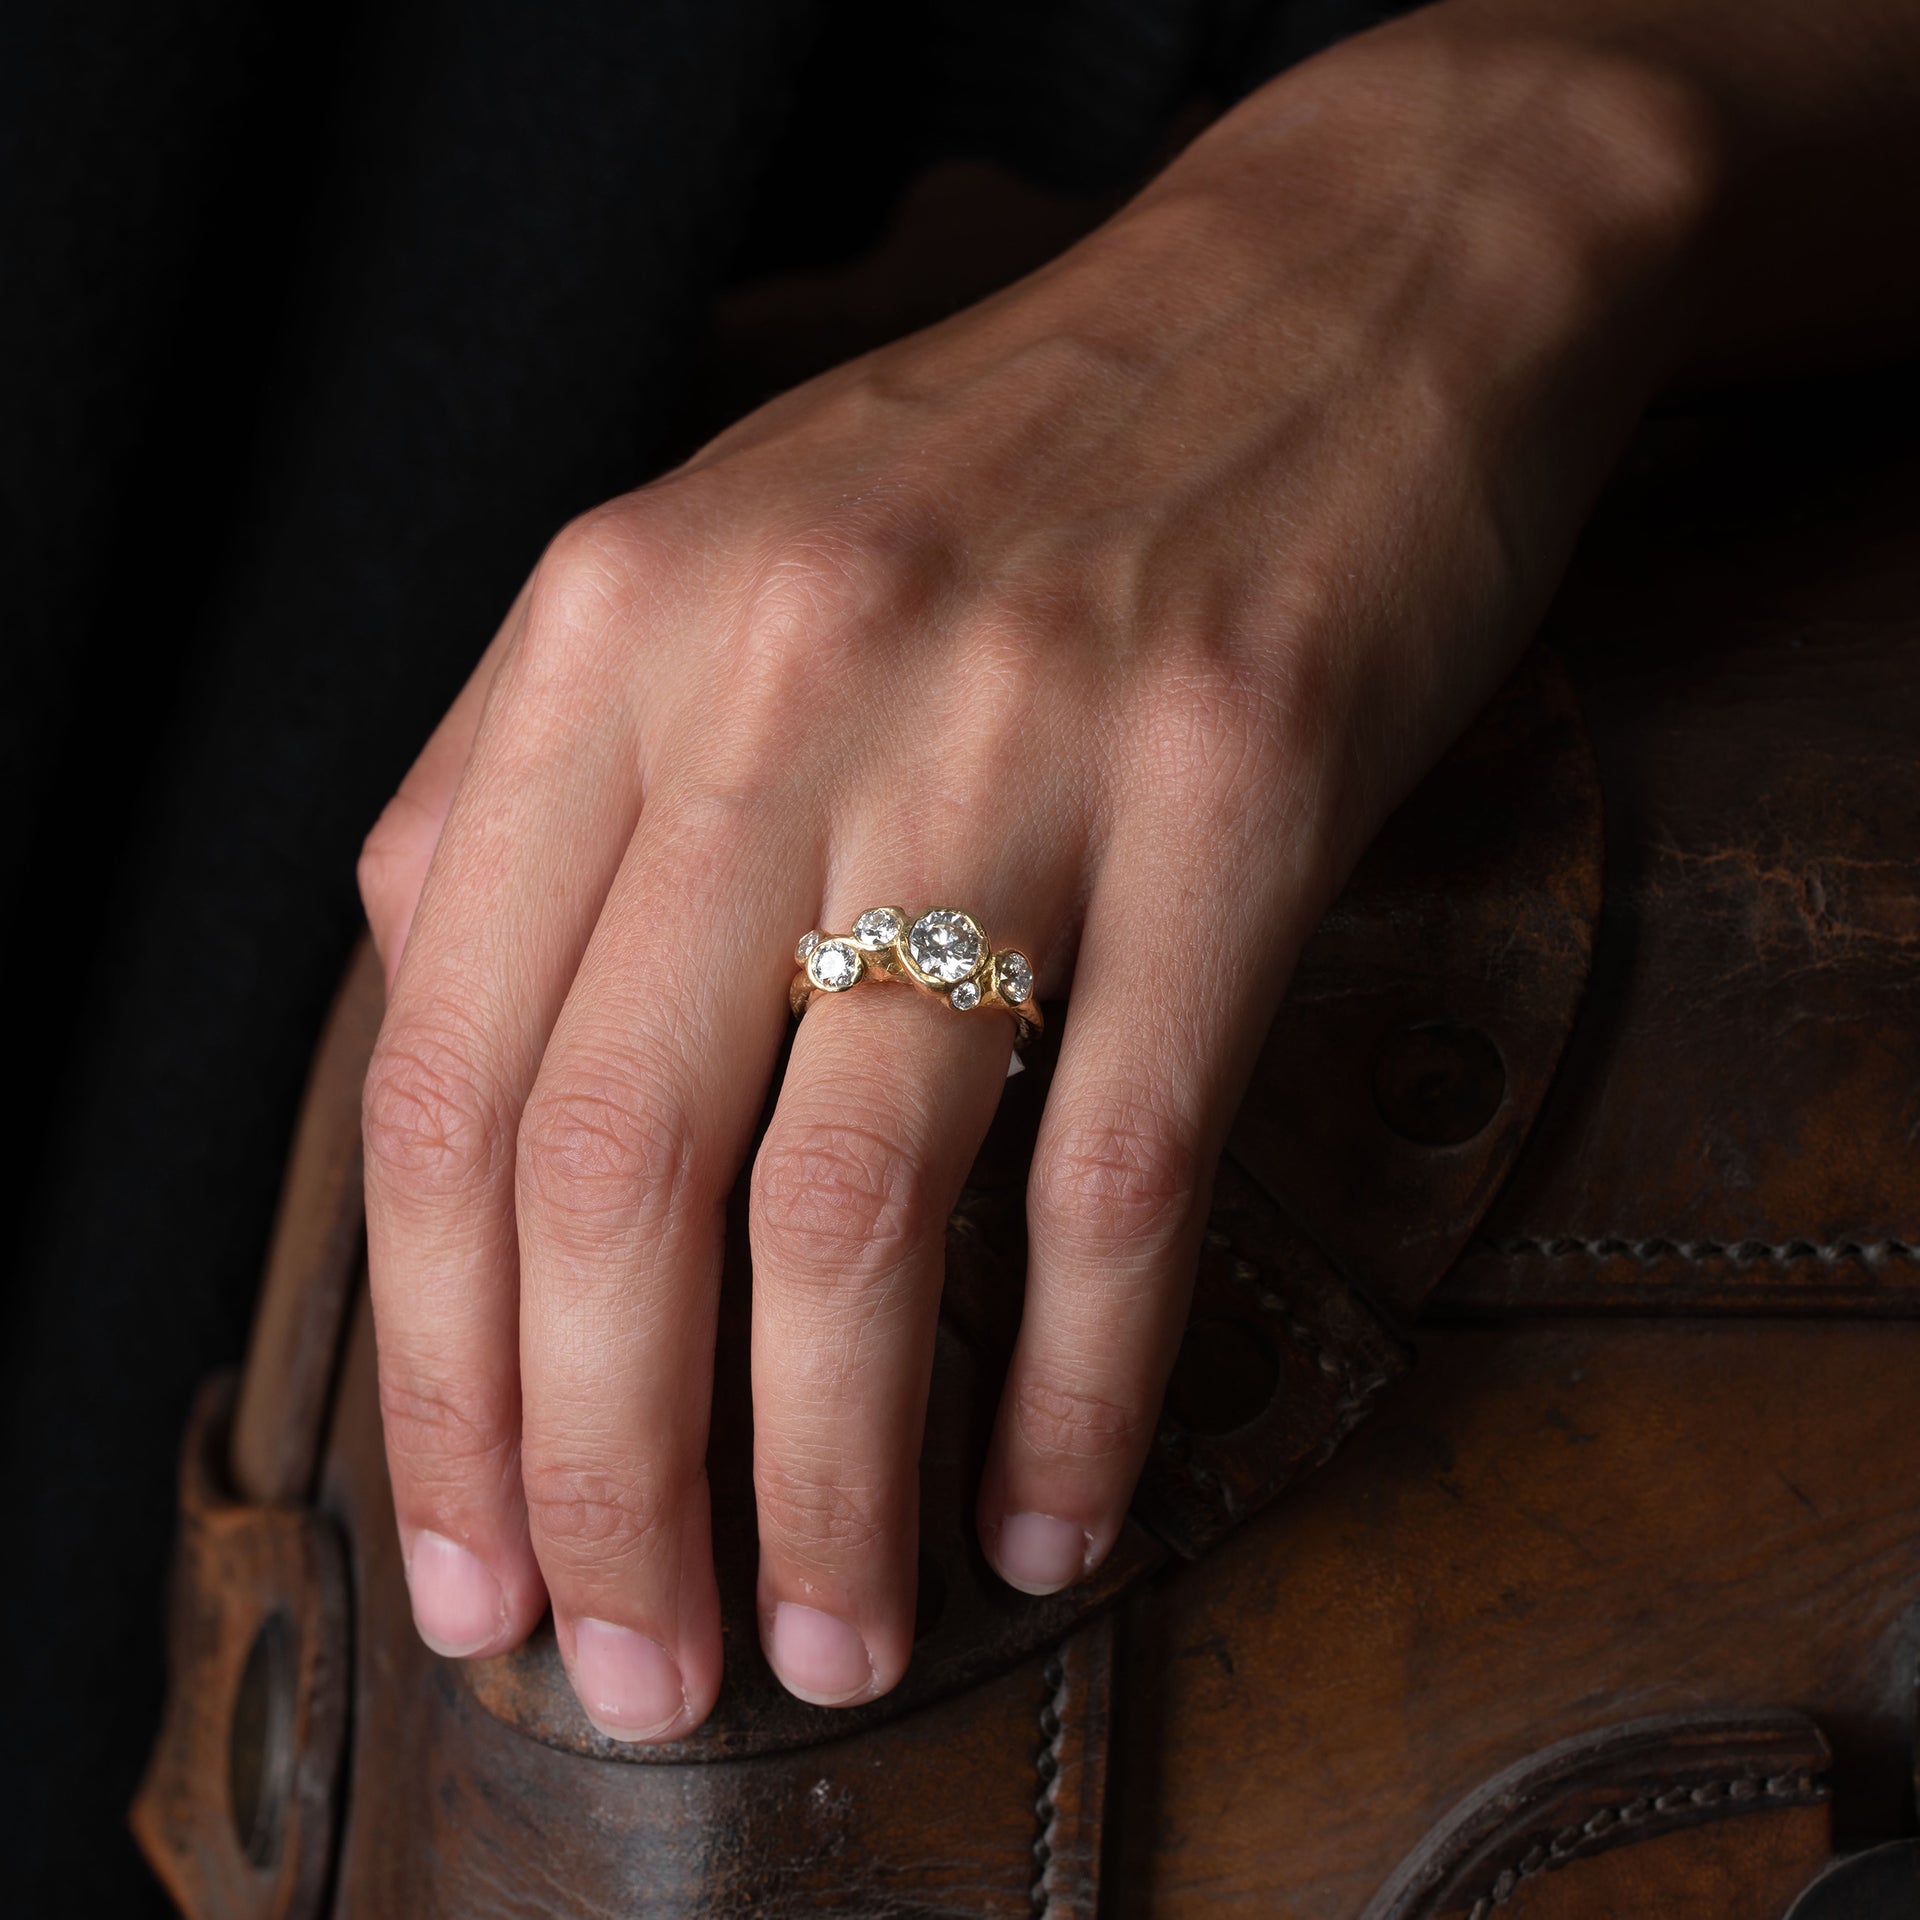 18ct gold and diamond engagement ring set in an unusual, sea worn texture, with 6 diamonds. Photographed on a models hand.